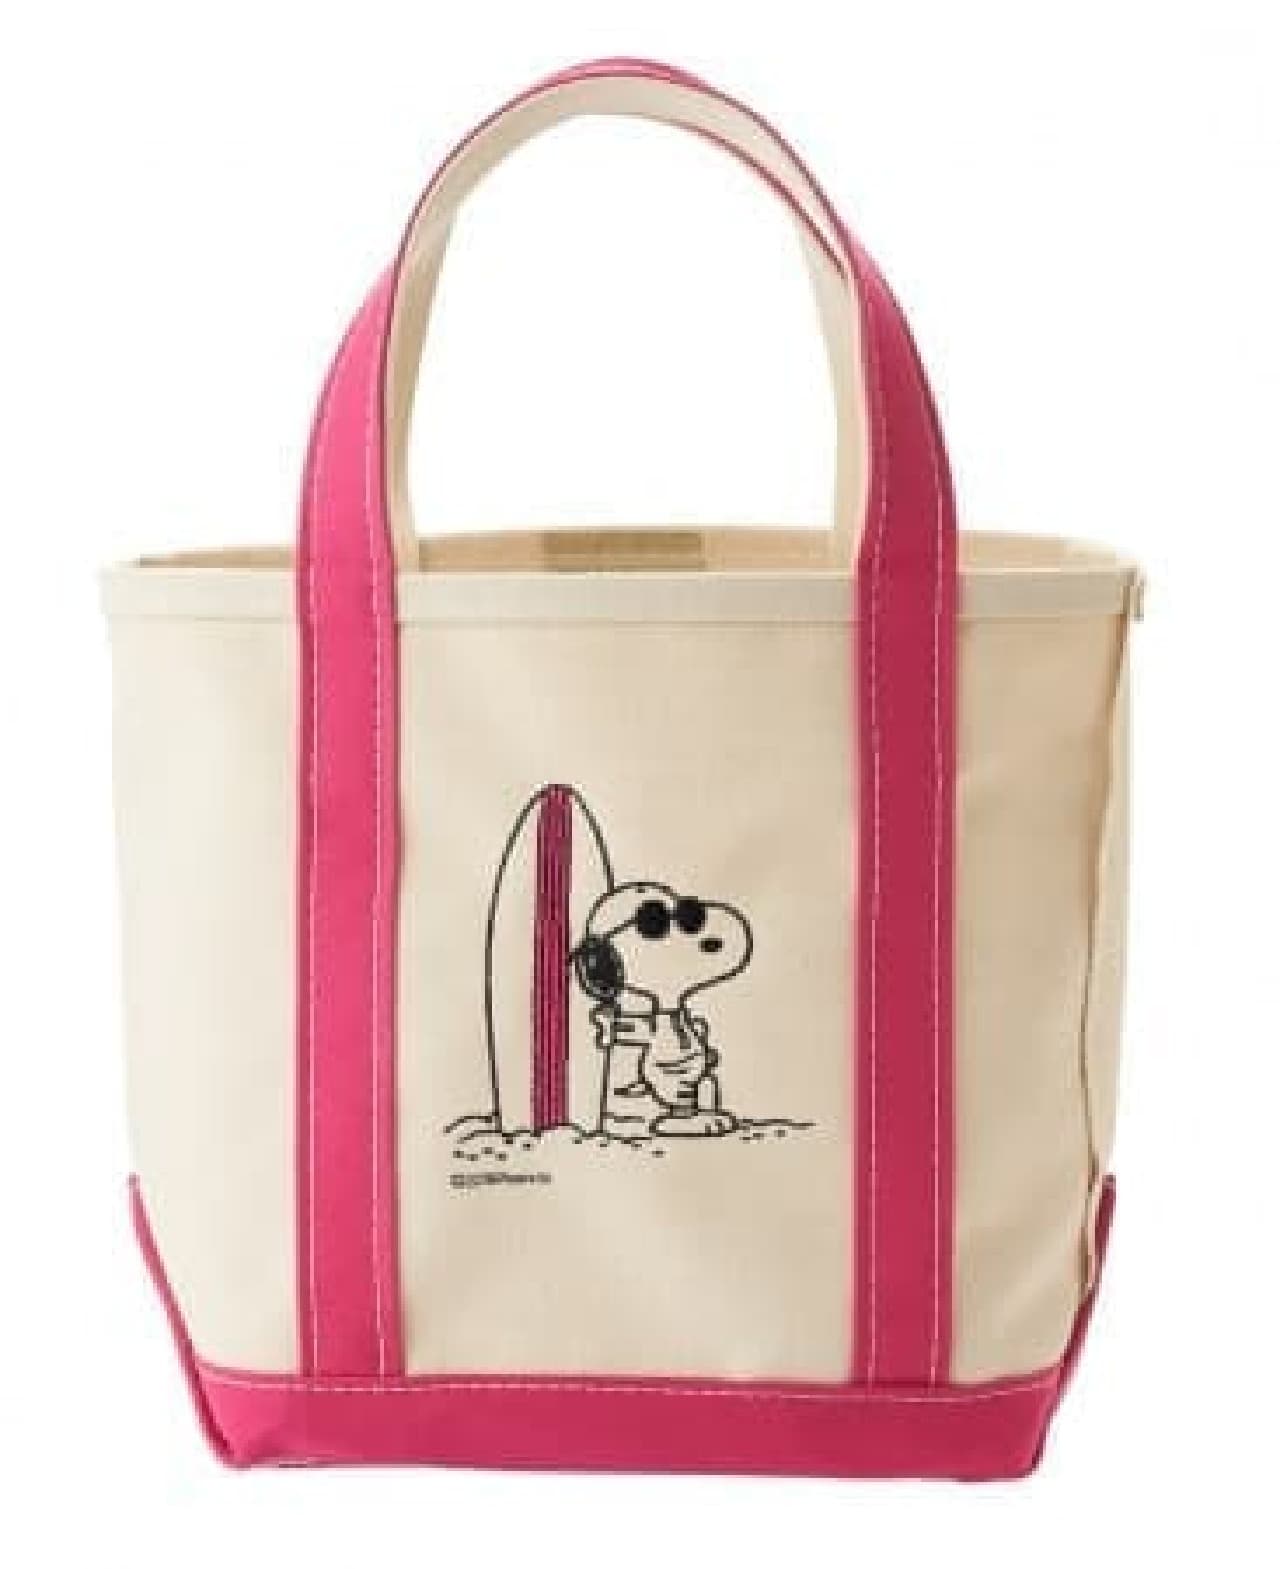 "LL Bean" tote bag in collaboration with Snoopy is now in PLAZA